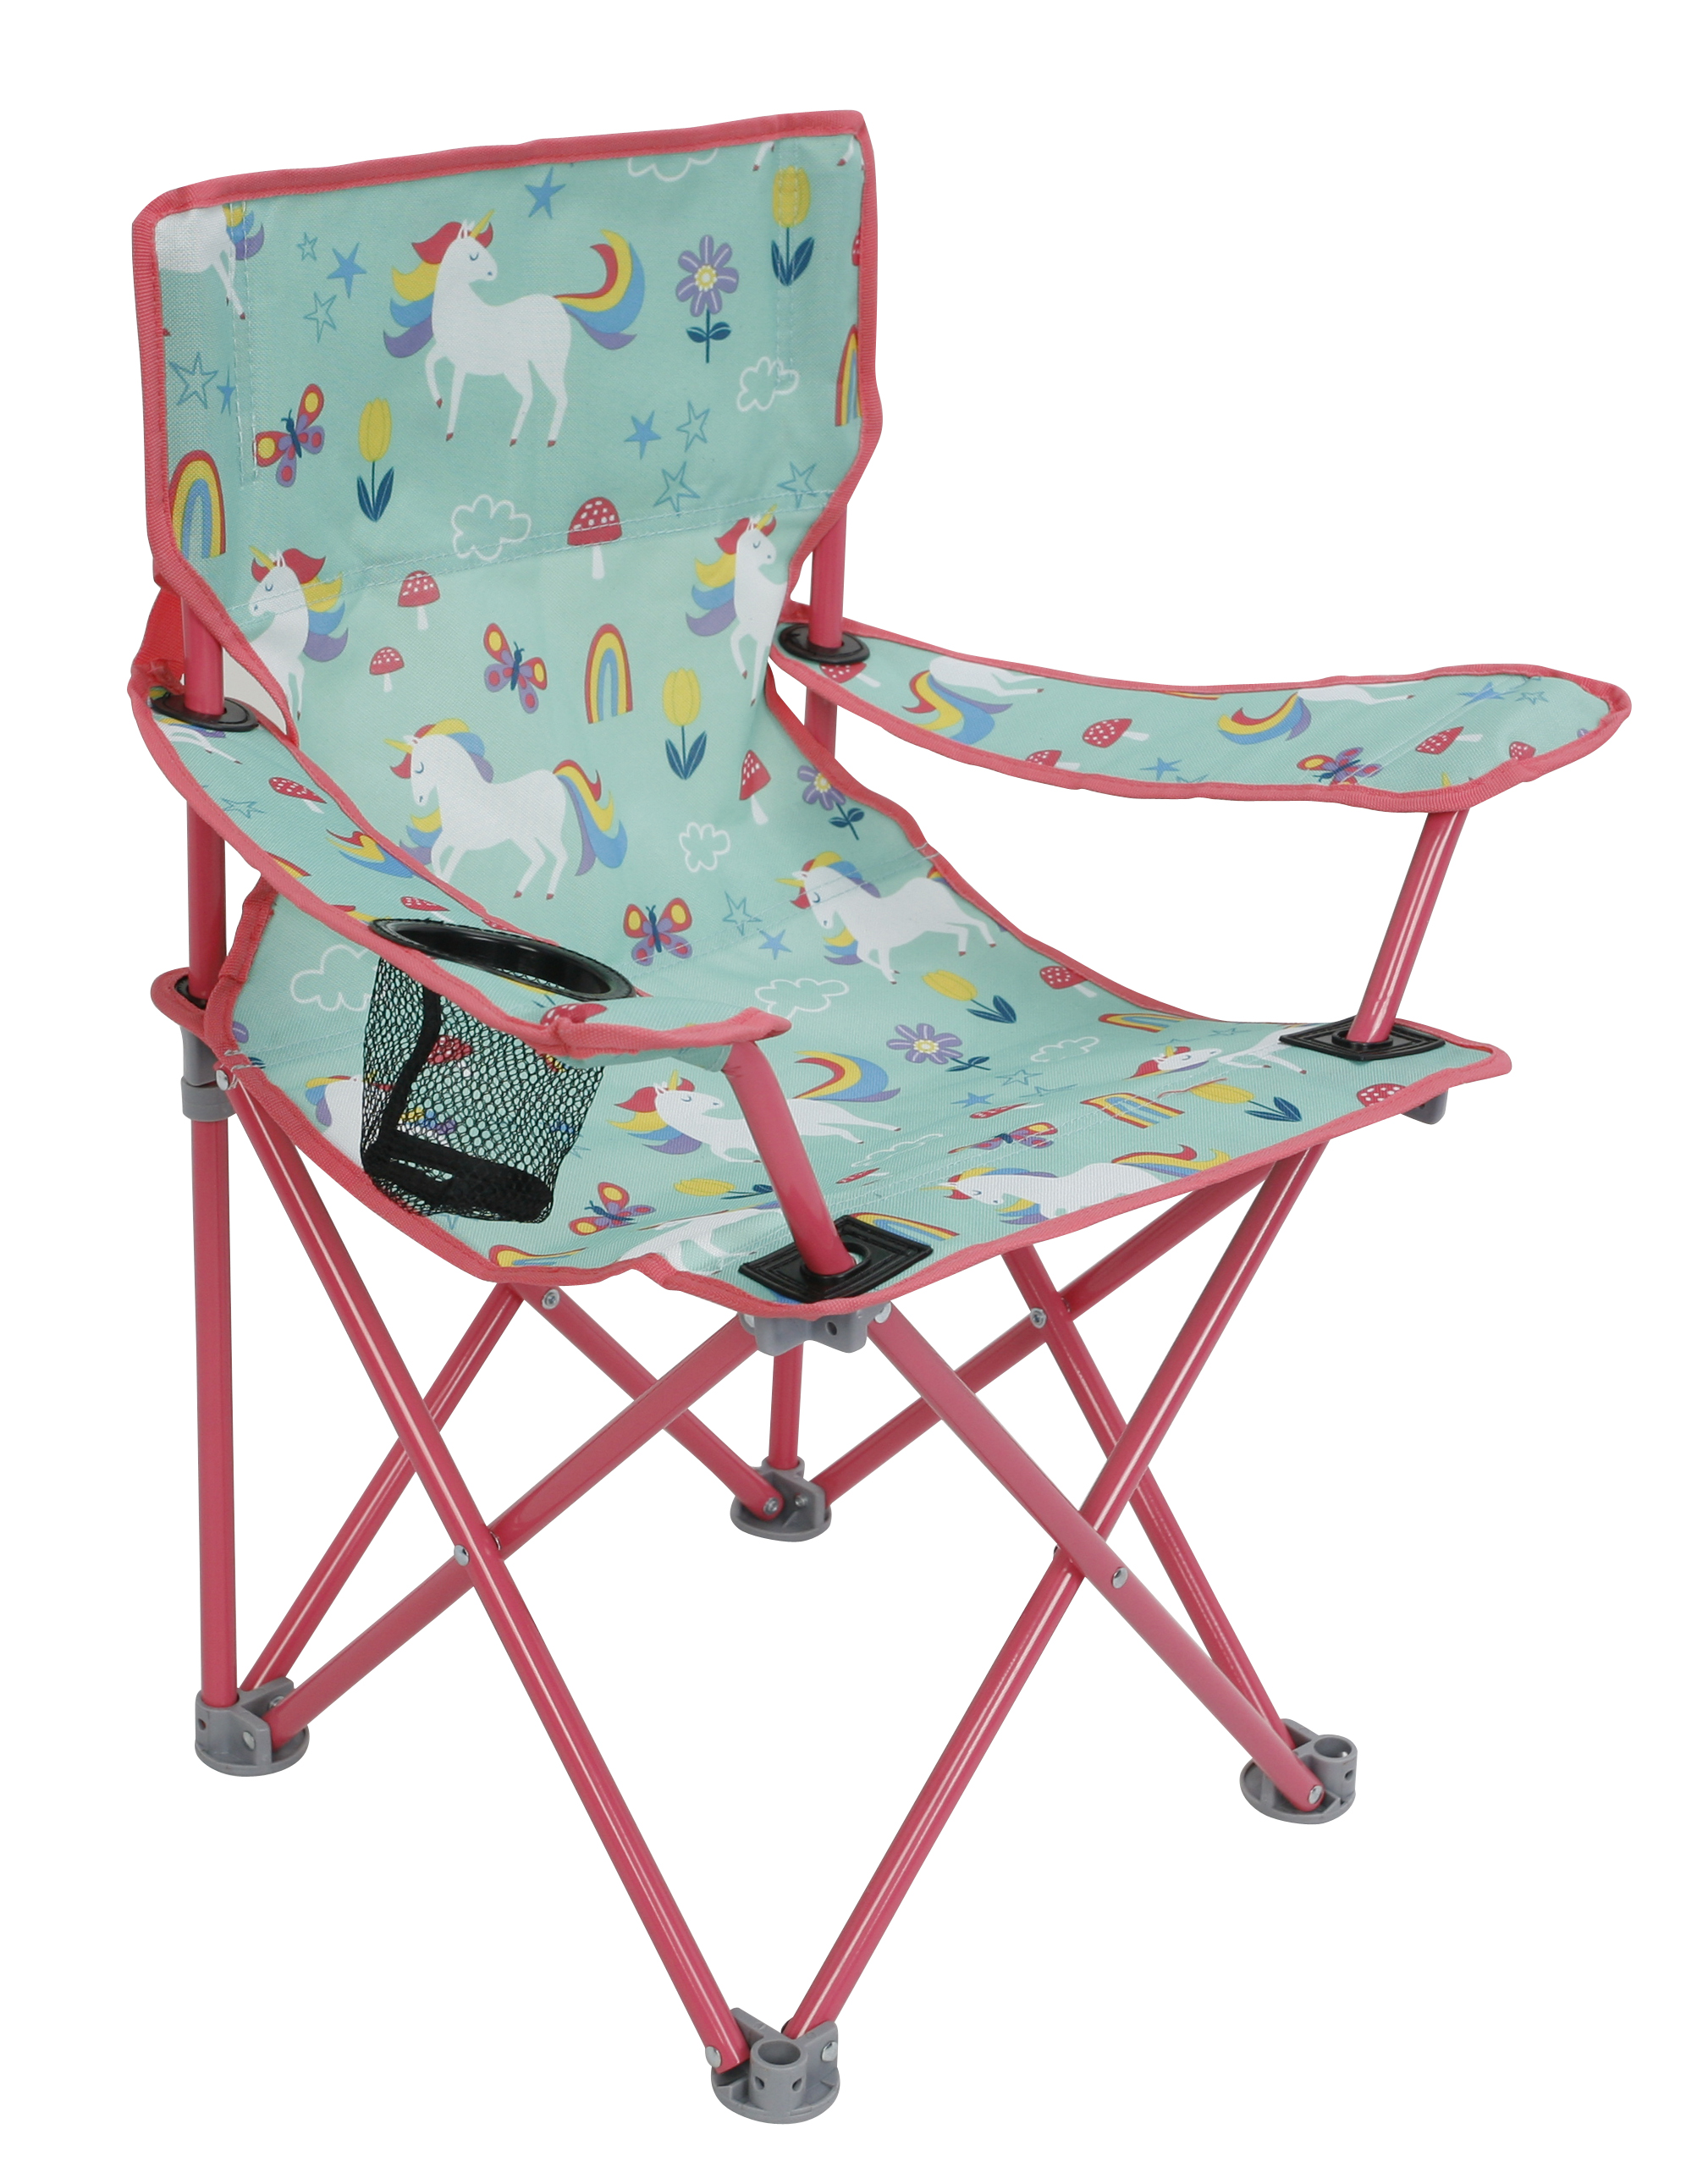 Crckt Kids Folding Camp Chair with Safety Lock (125lb Capacity) Unicorn Print - image 1 of 6